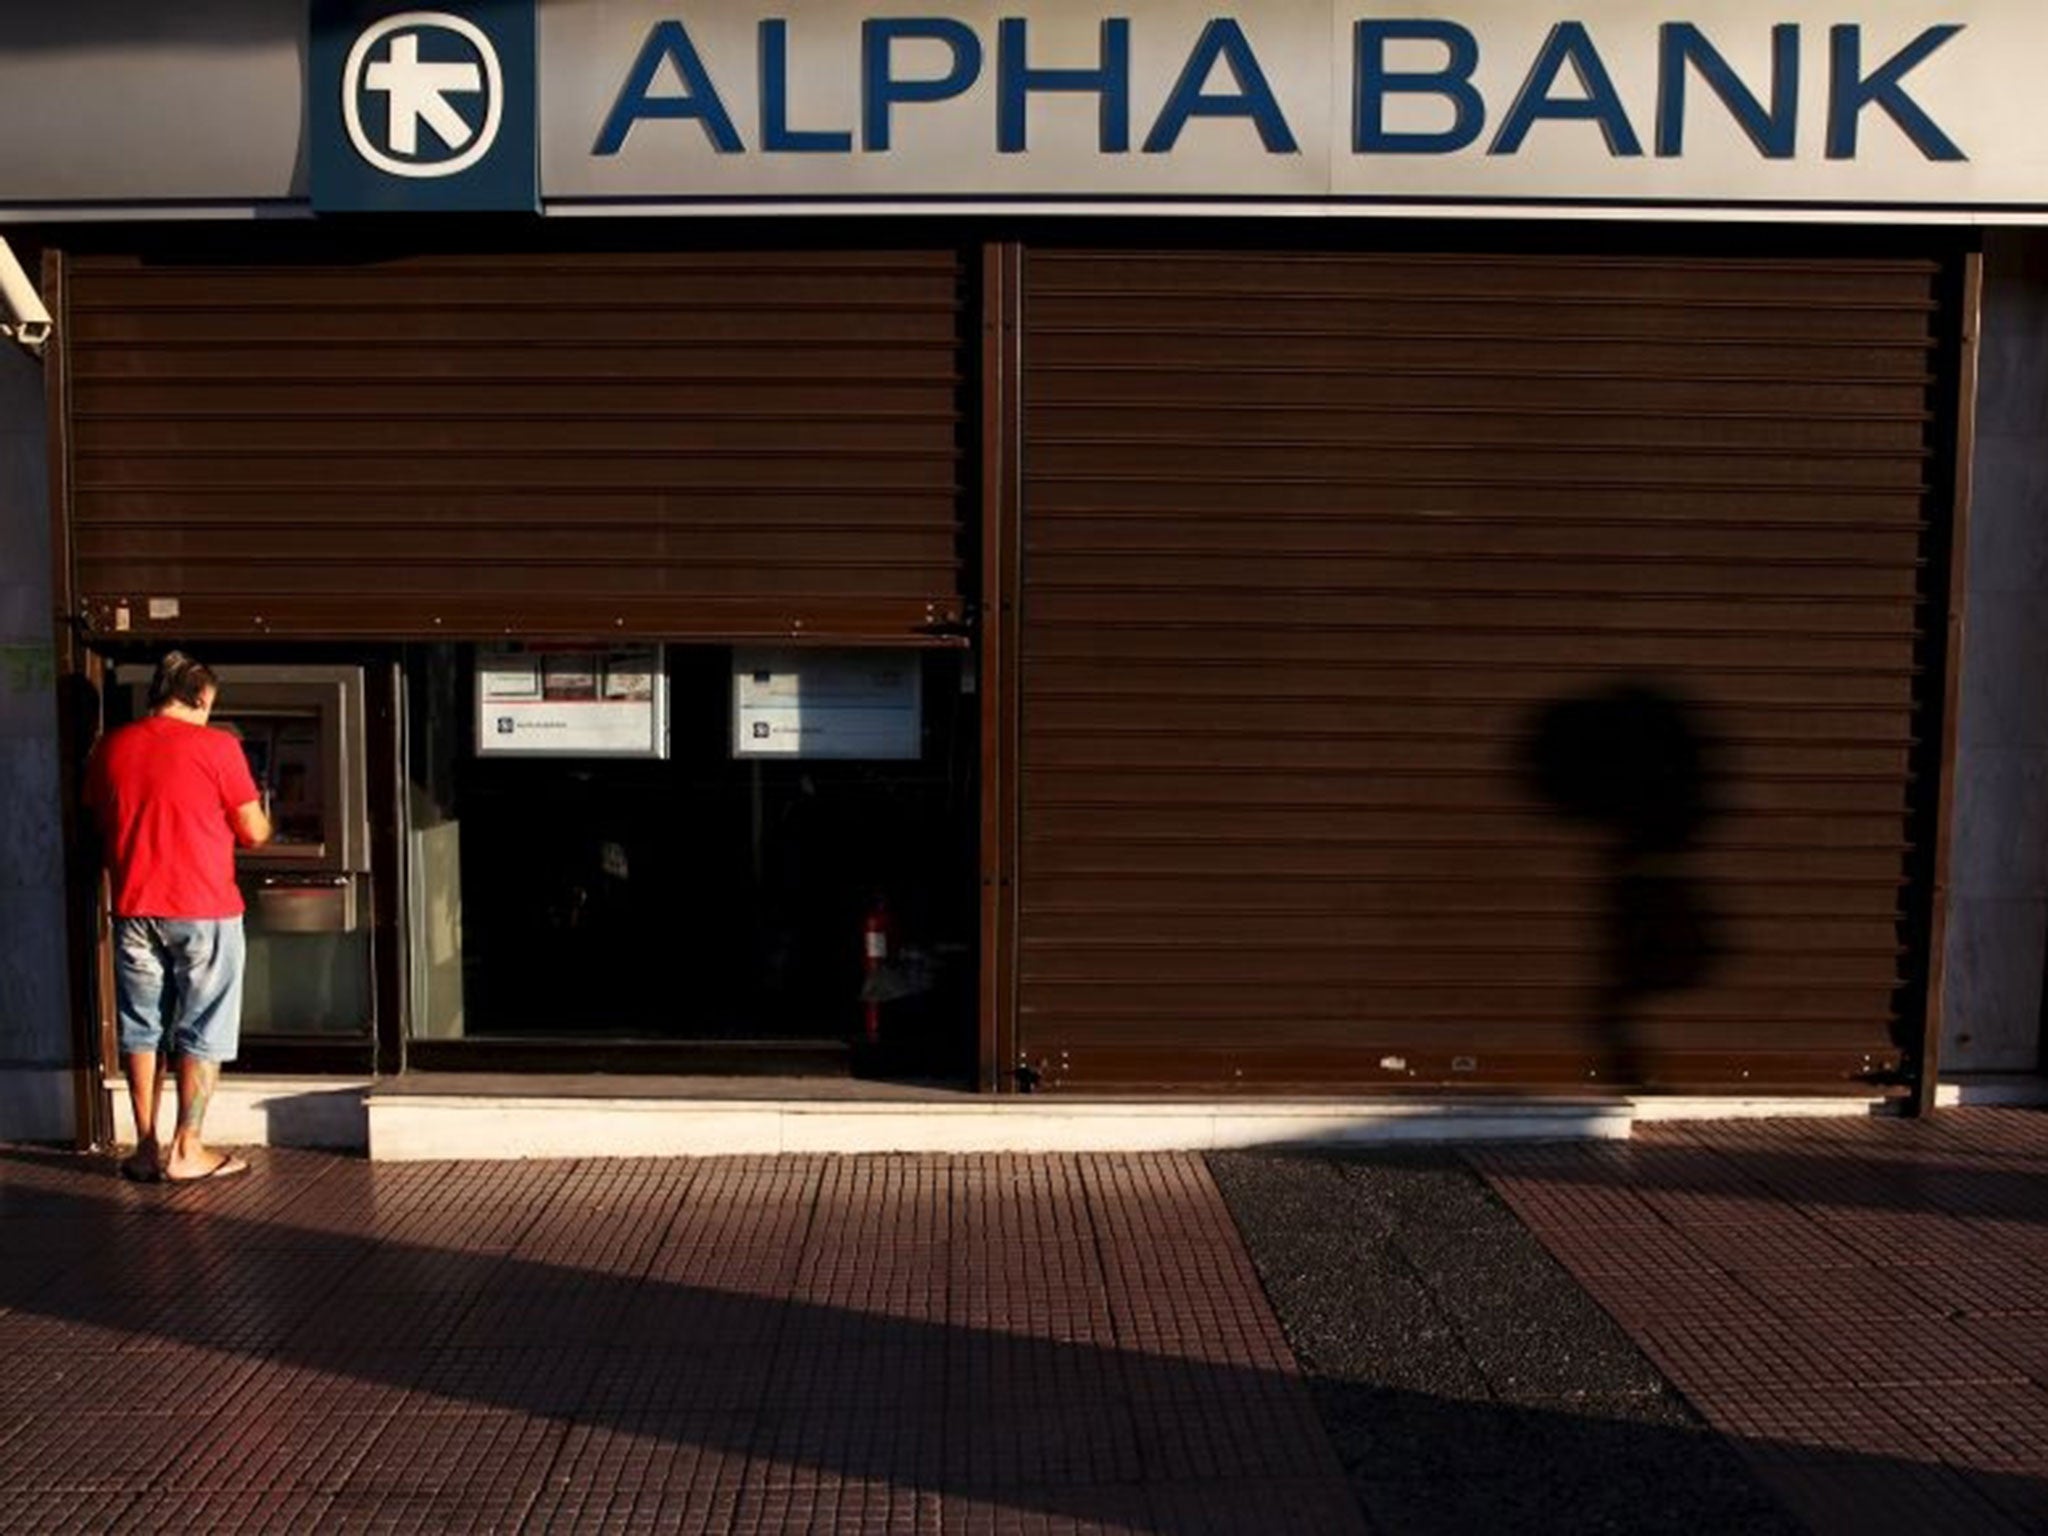 Banks in Greece have re-opened three weeks after they were shut